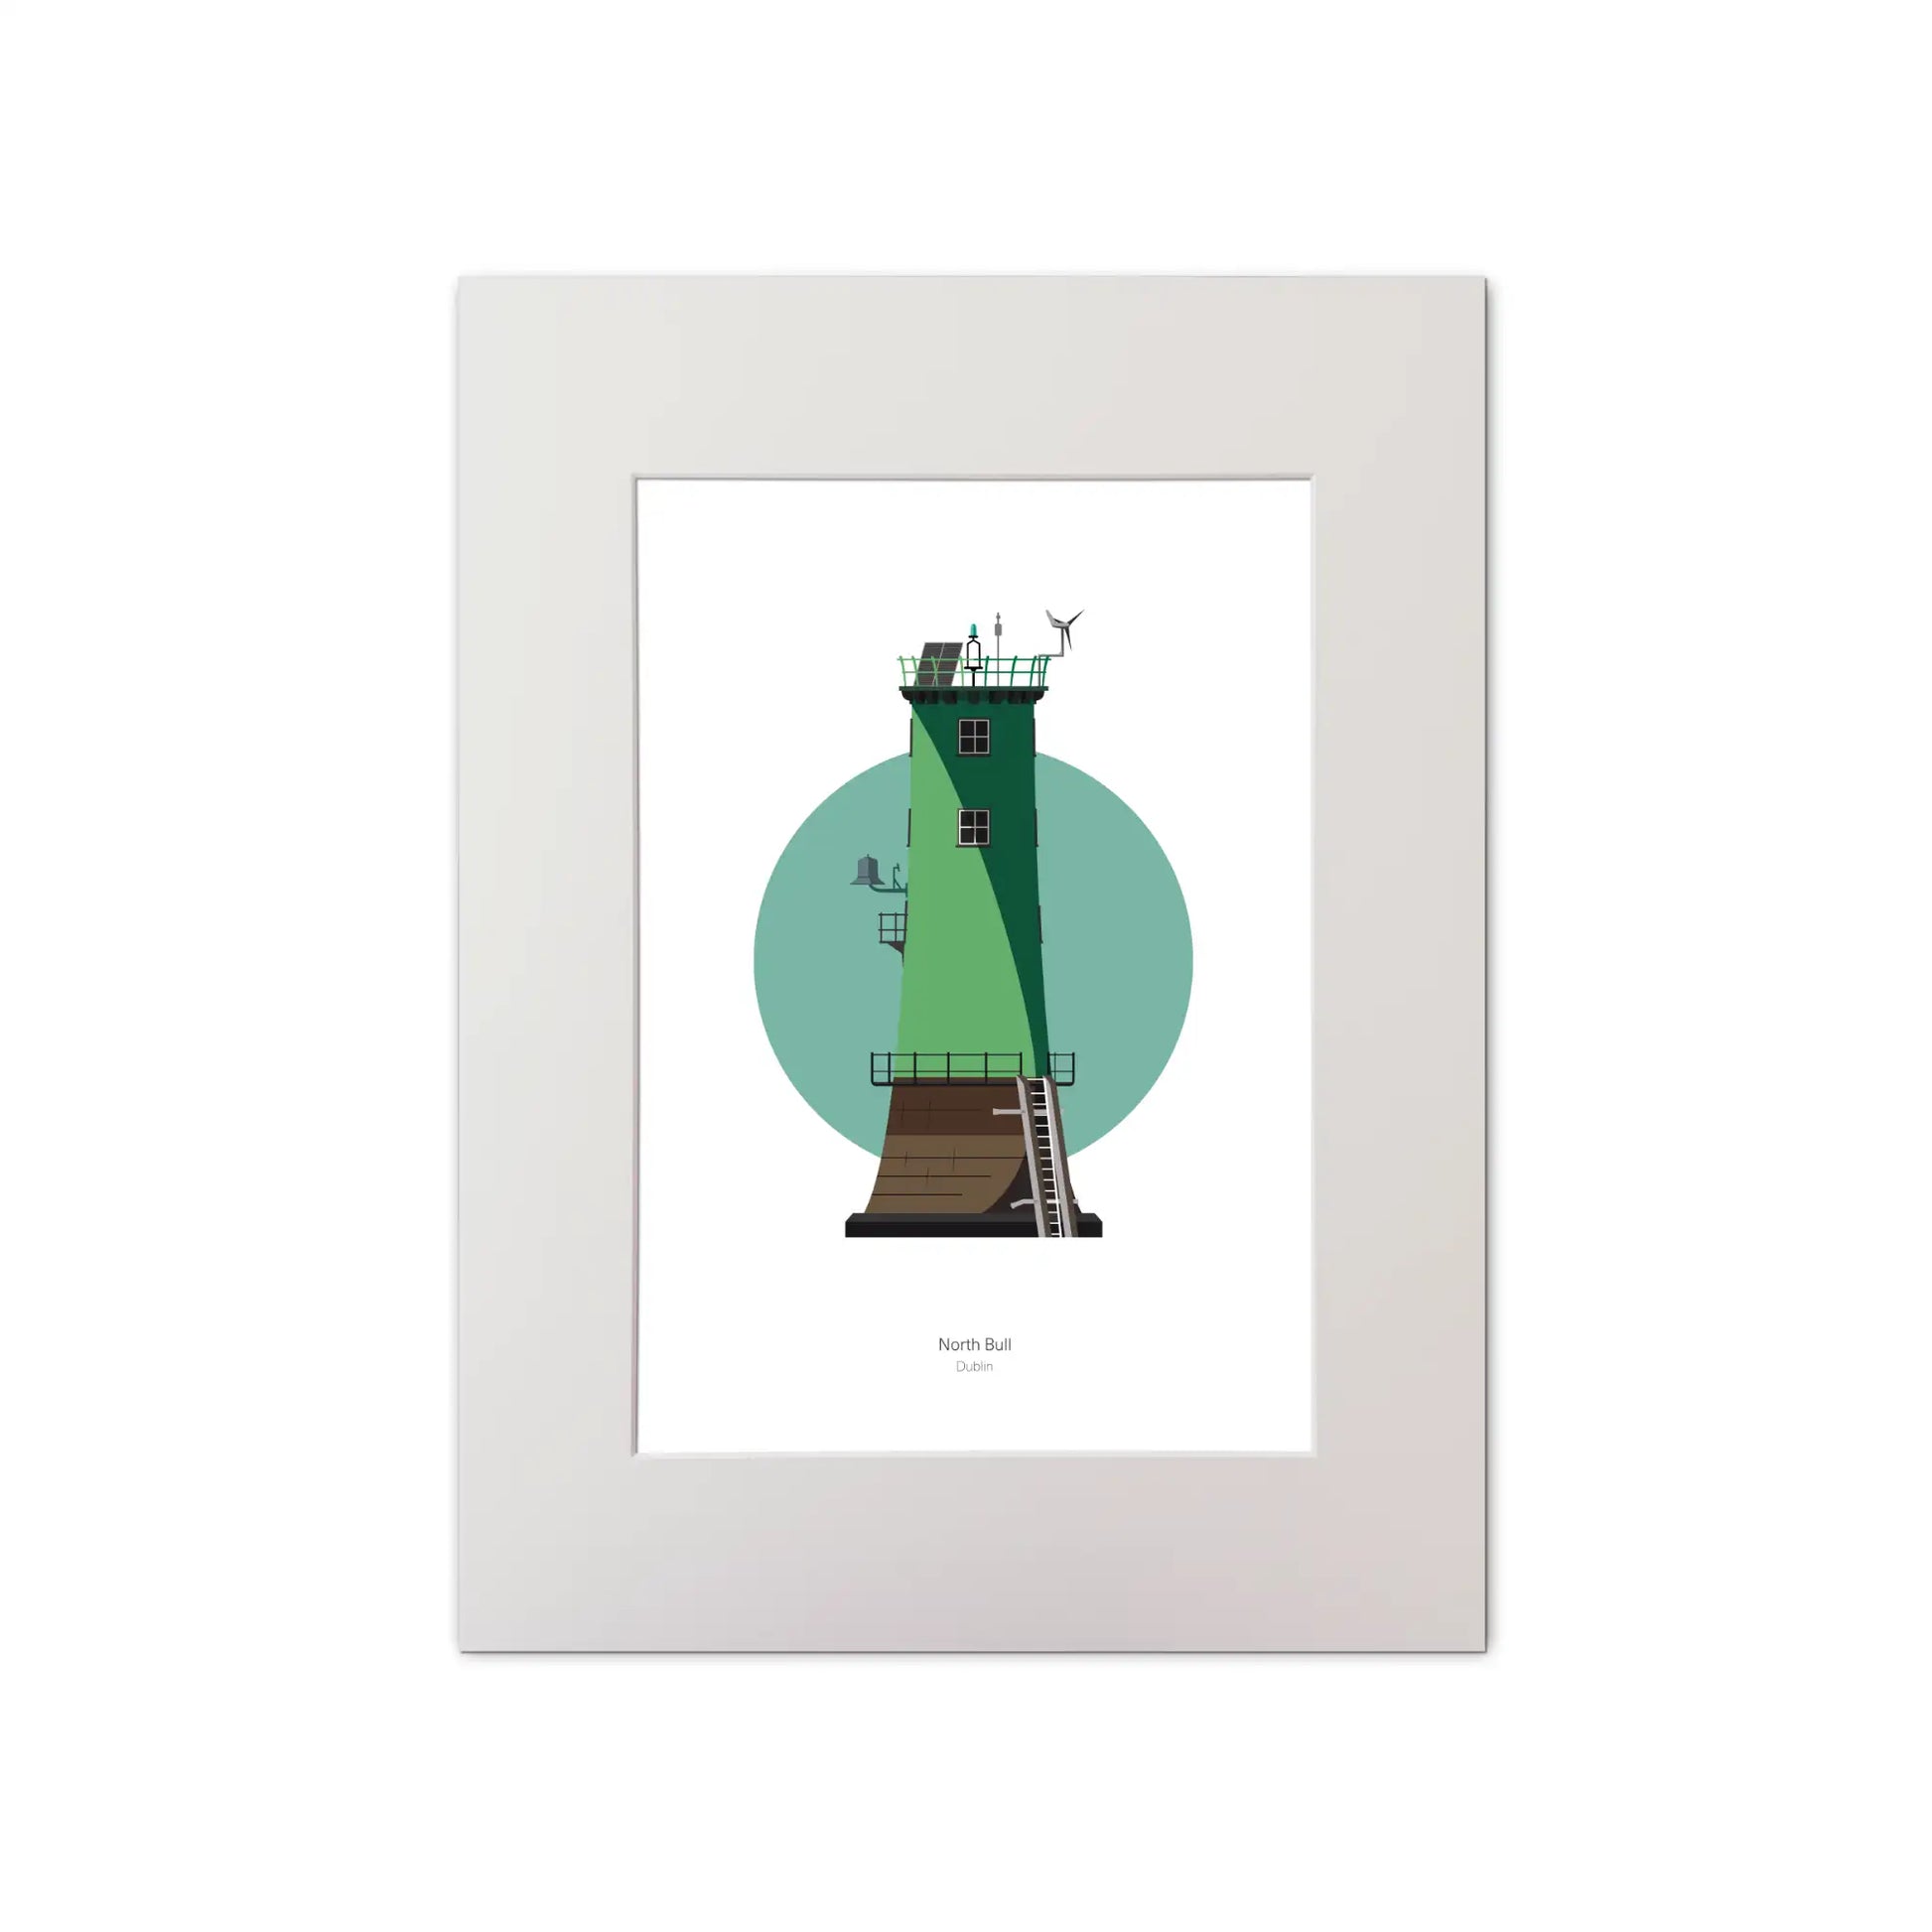 Illustration of North Bull lighthouse on a white background inside light blue square, mounted and measuring 30x40cm.